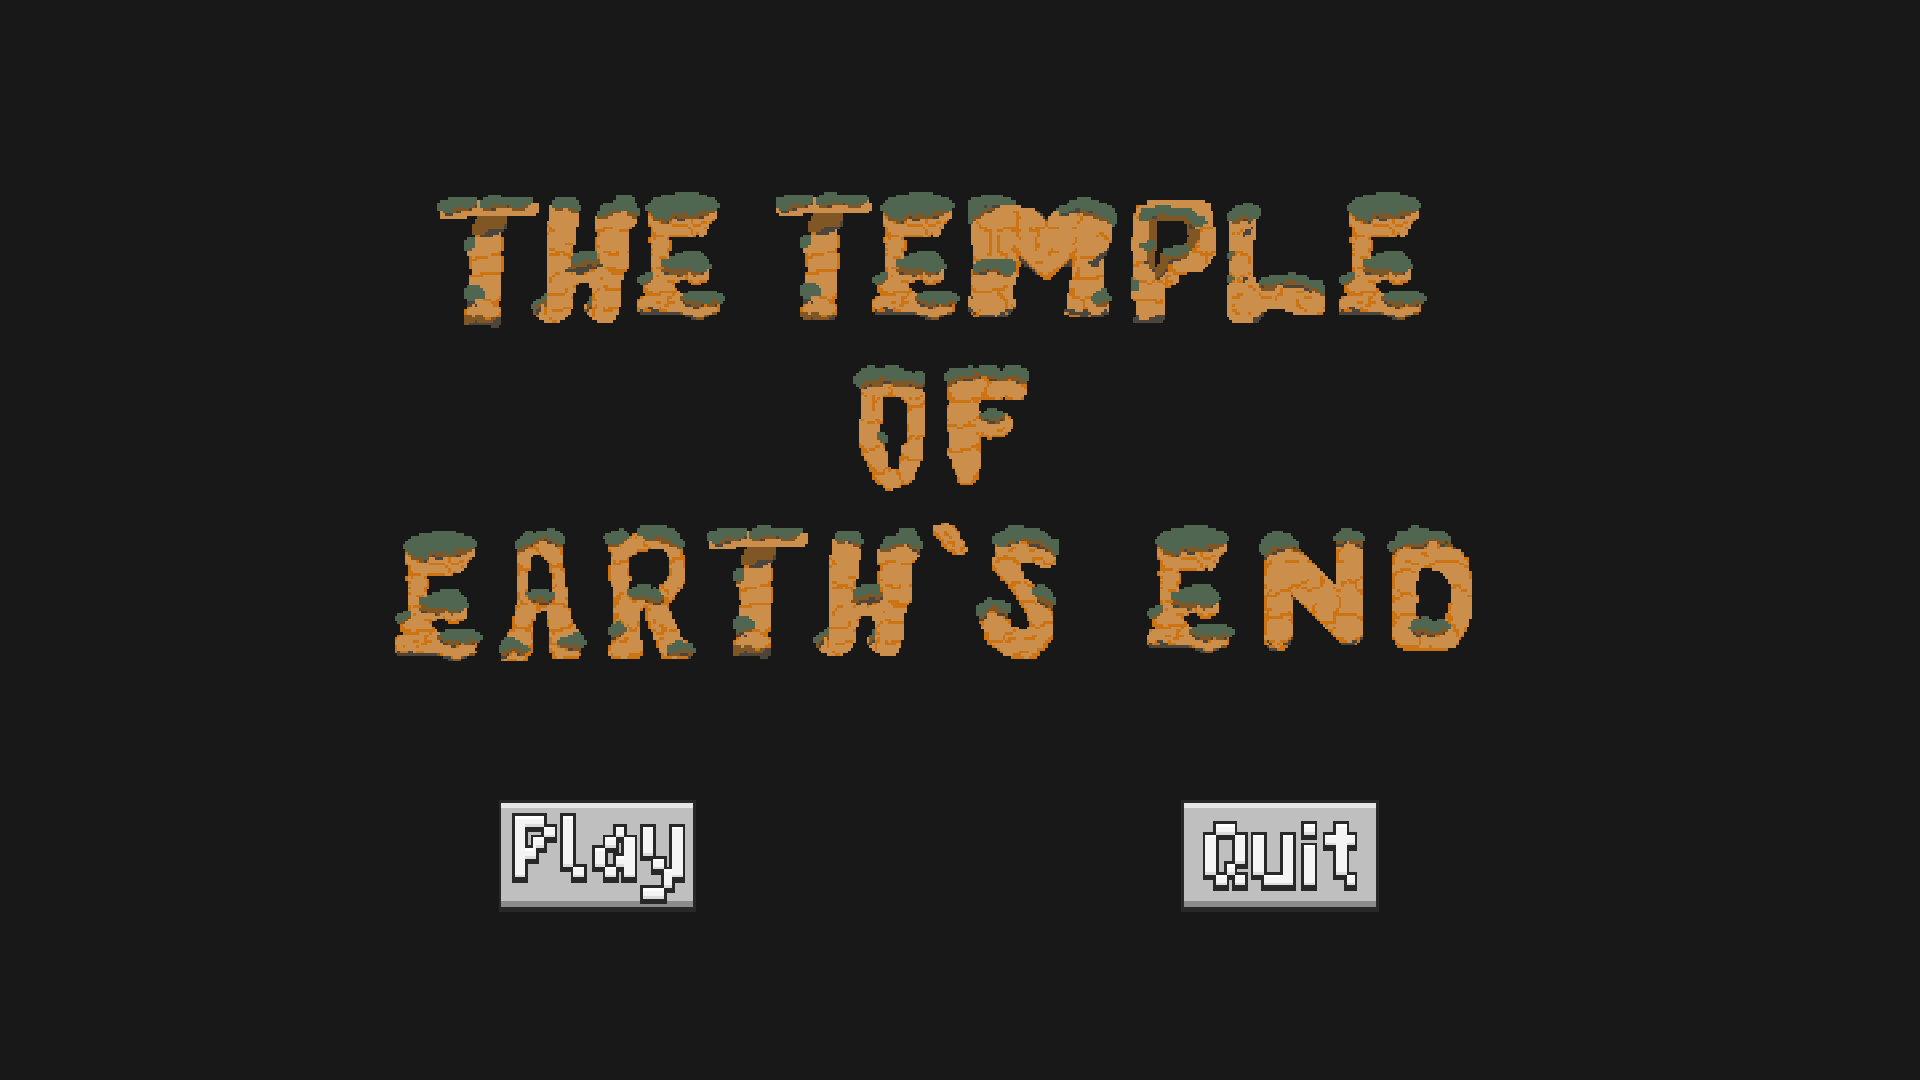 The Temple of Earth's End